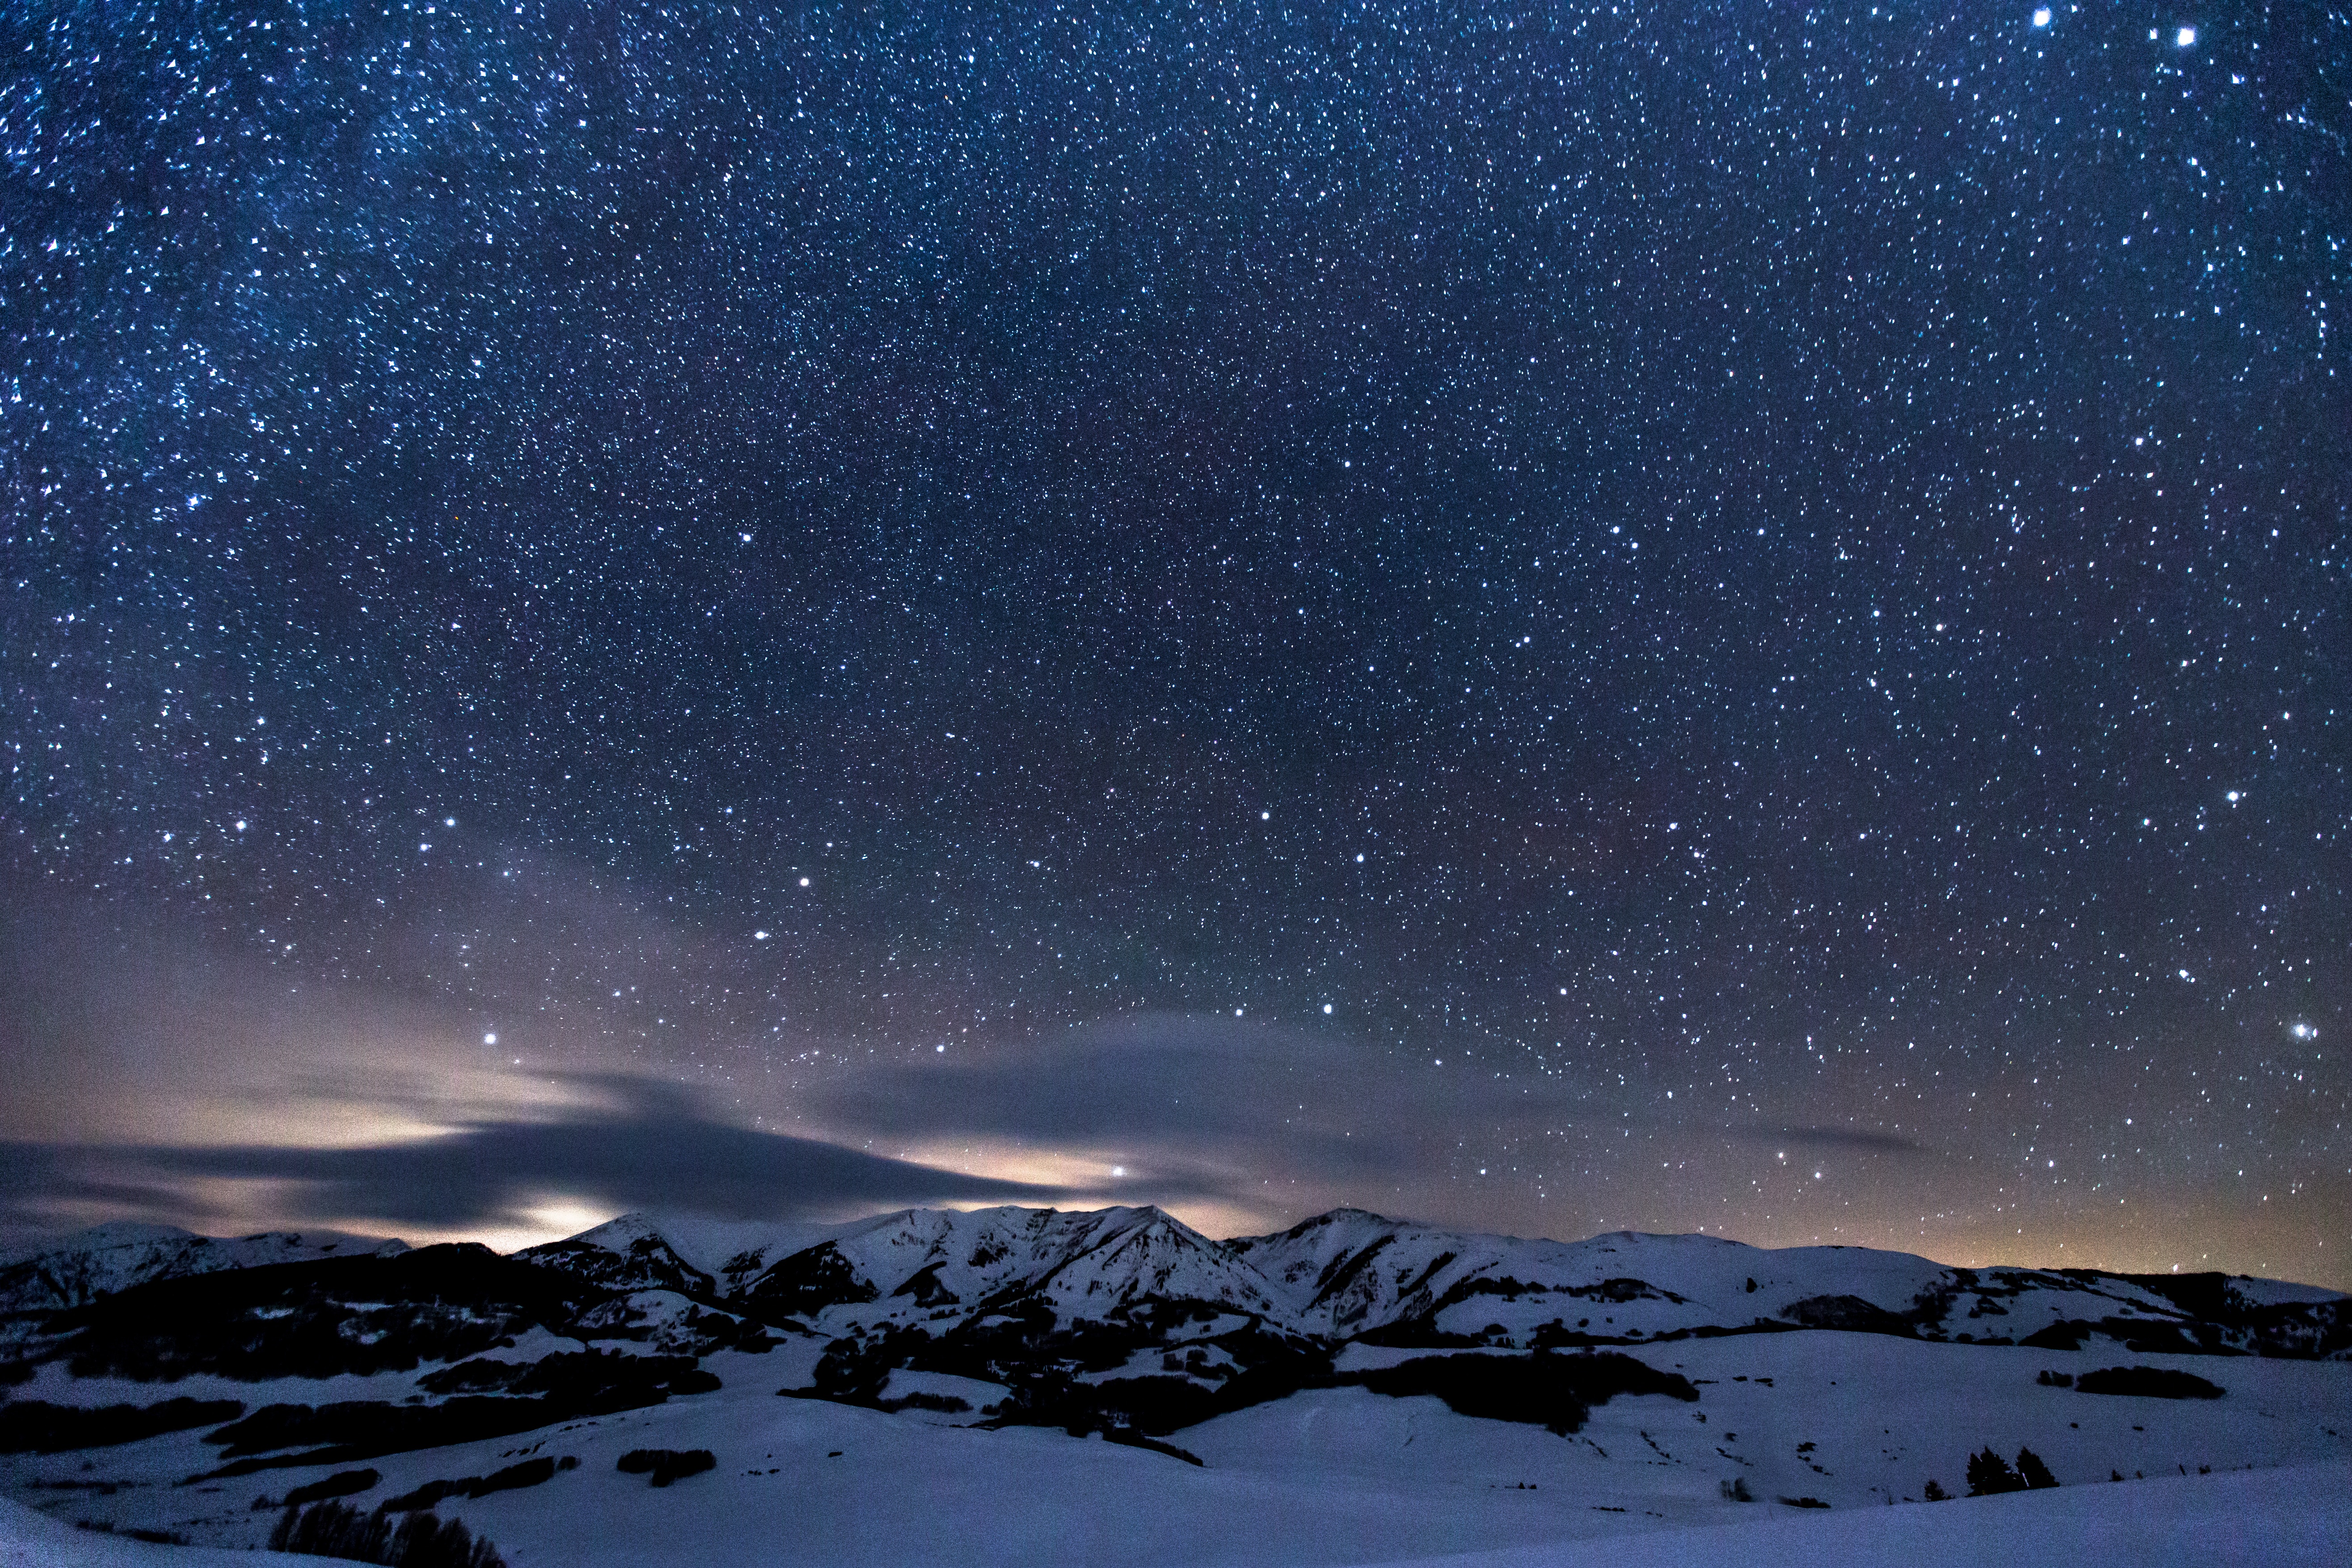 5263x3509 tumblr, cloud, landscape, night, night sky, star, winter, hill, hillside, cool background, mountain, night landscape, cool wallpaper, winter landscape, wallpaper, snowcapped, Free image, starry sky, snow Gallery HD Wallpaper